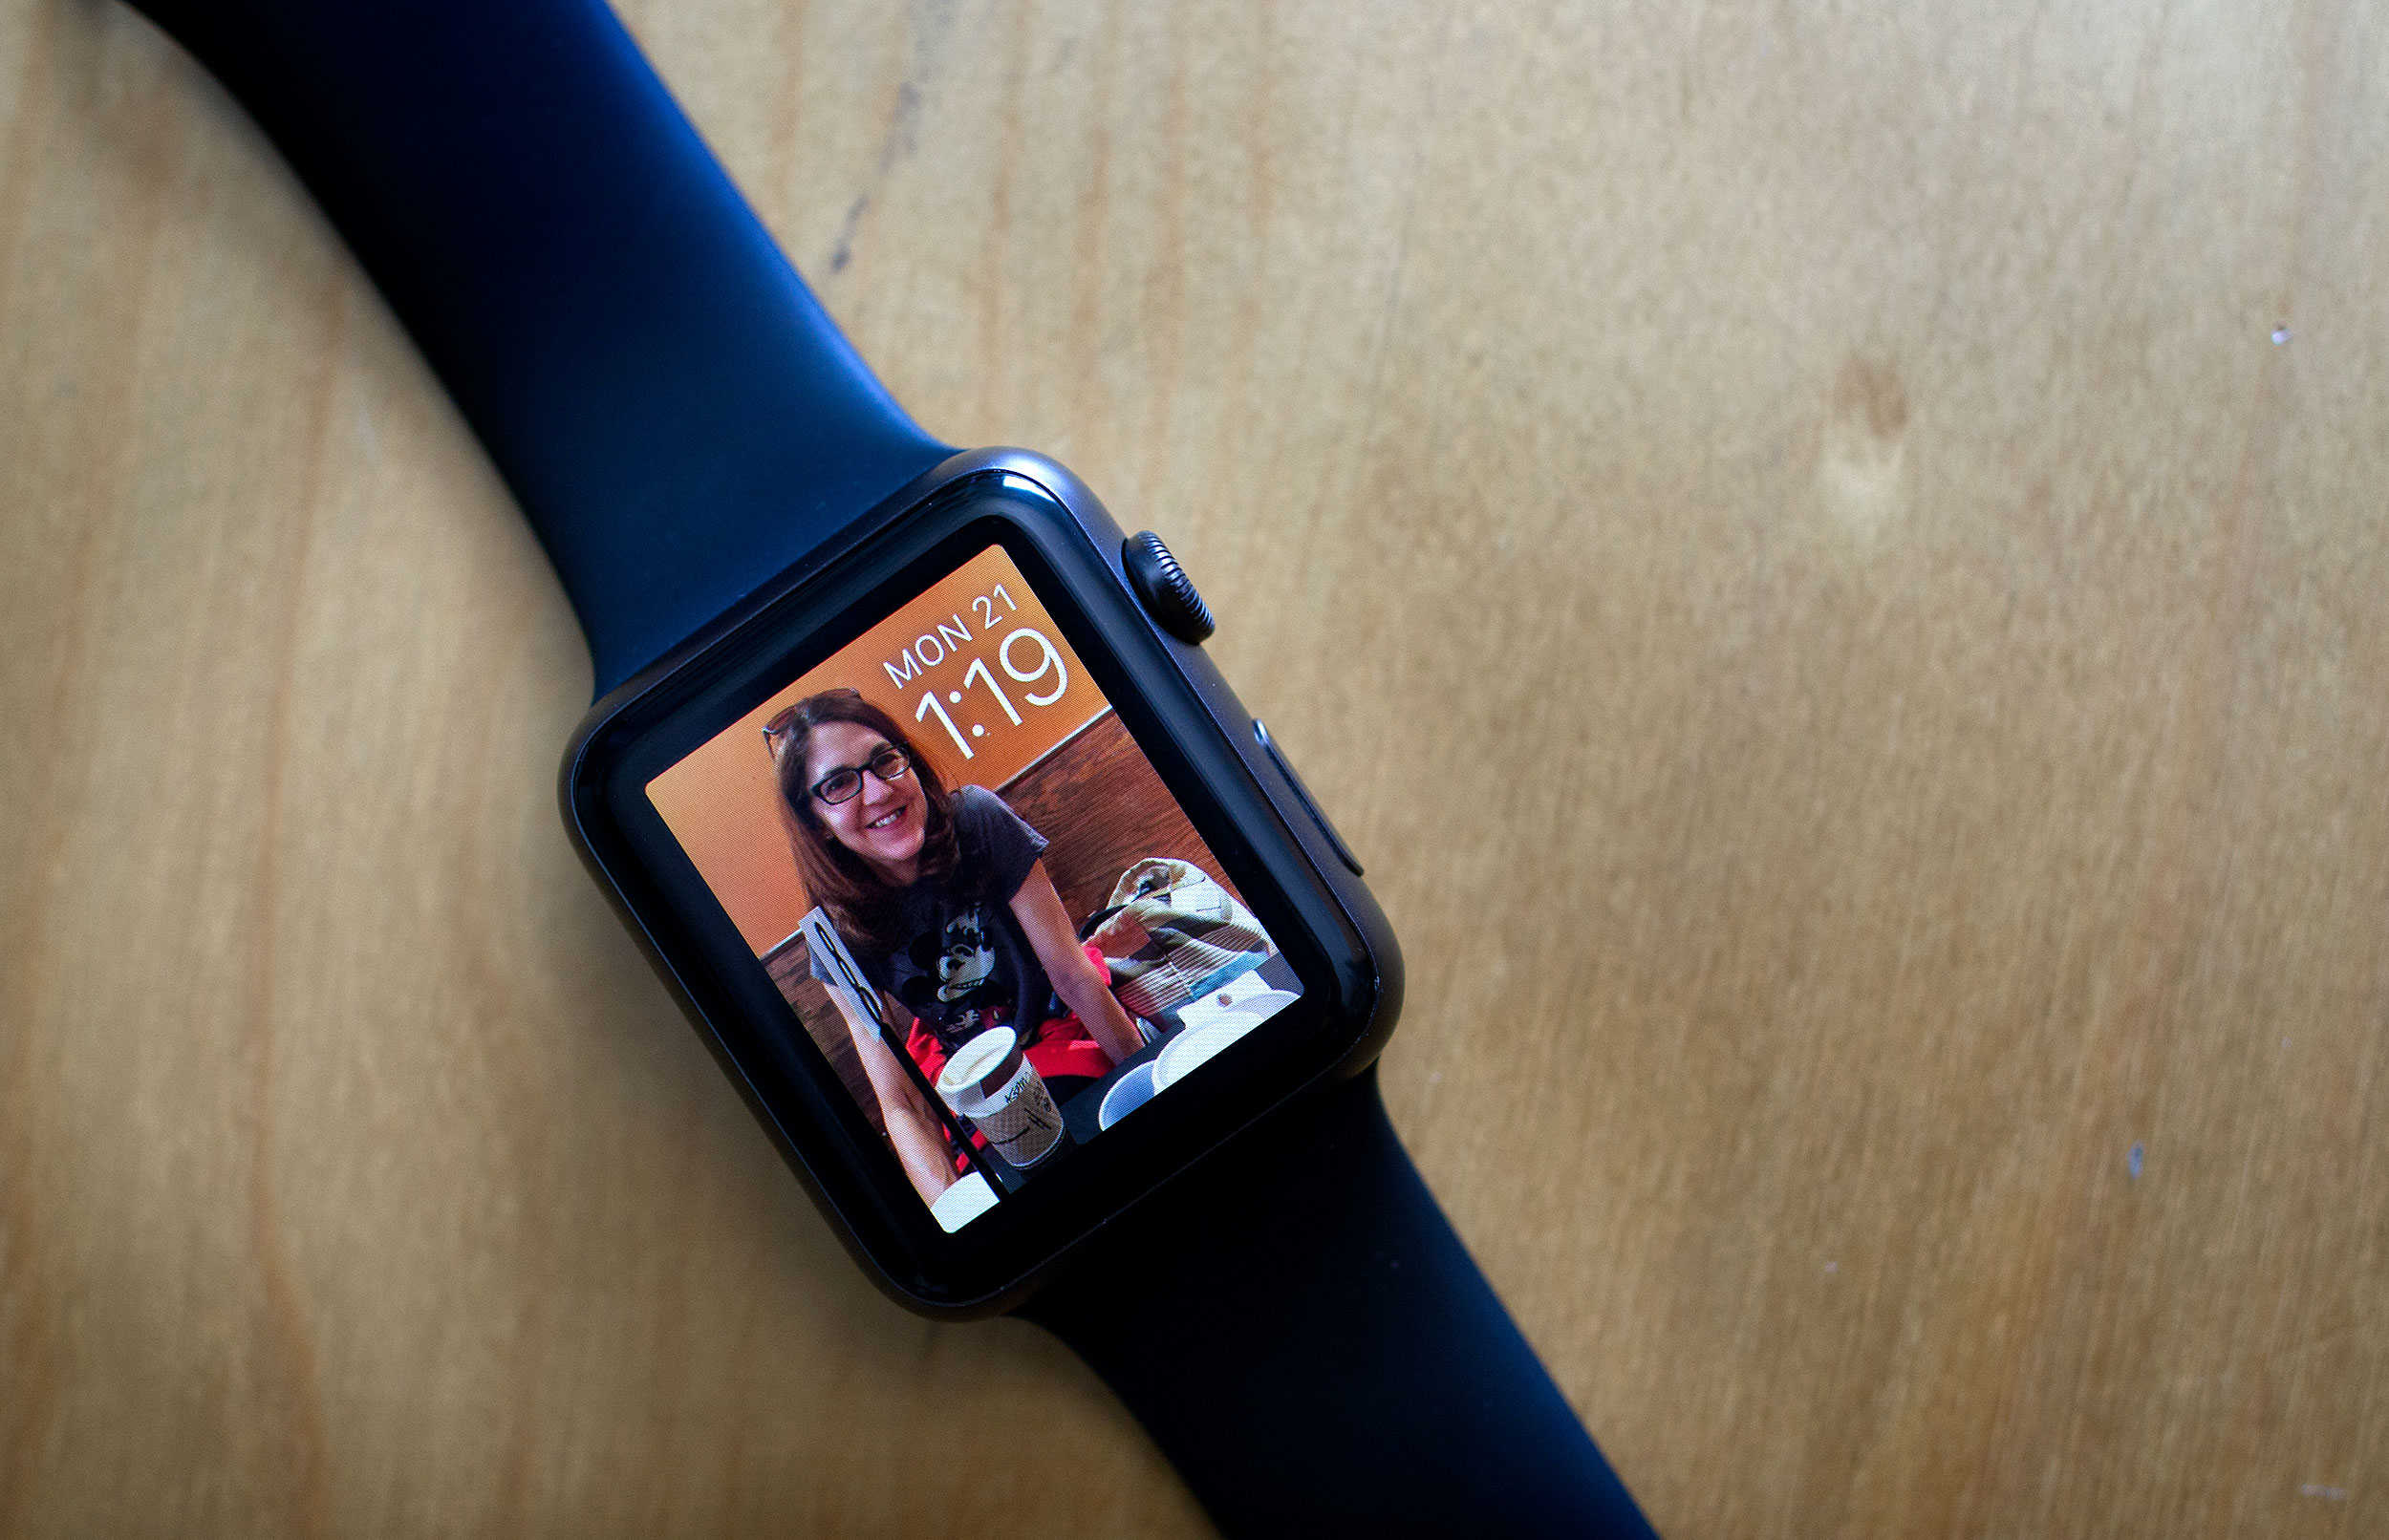 Prep photos perfectly for your custom Apple Watch face | Cult of Mac